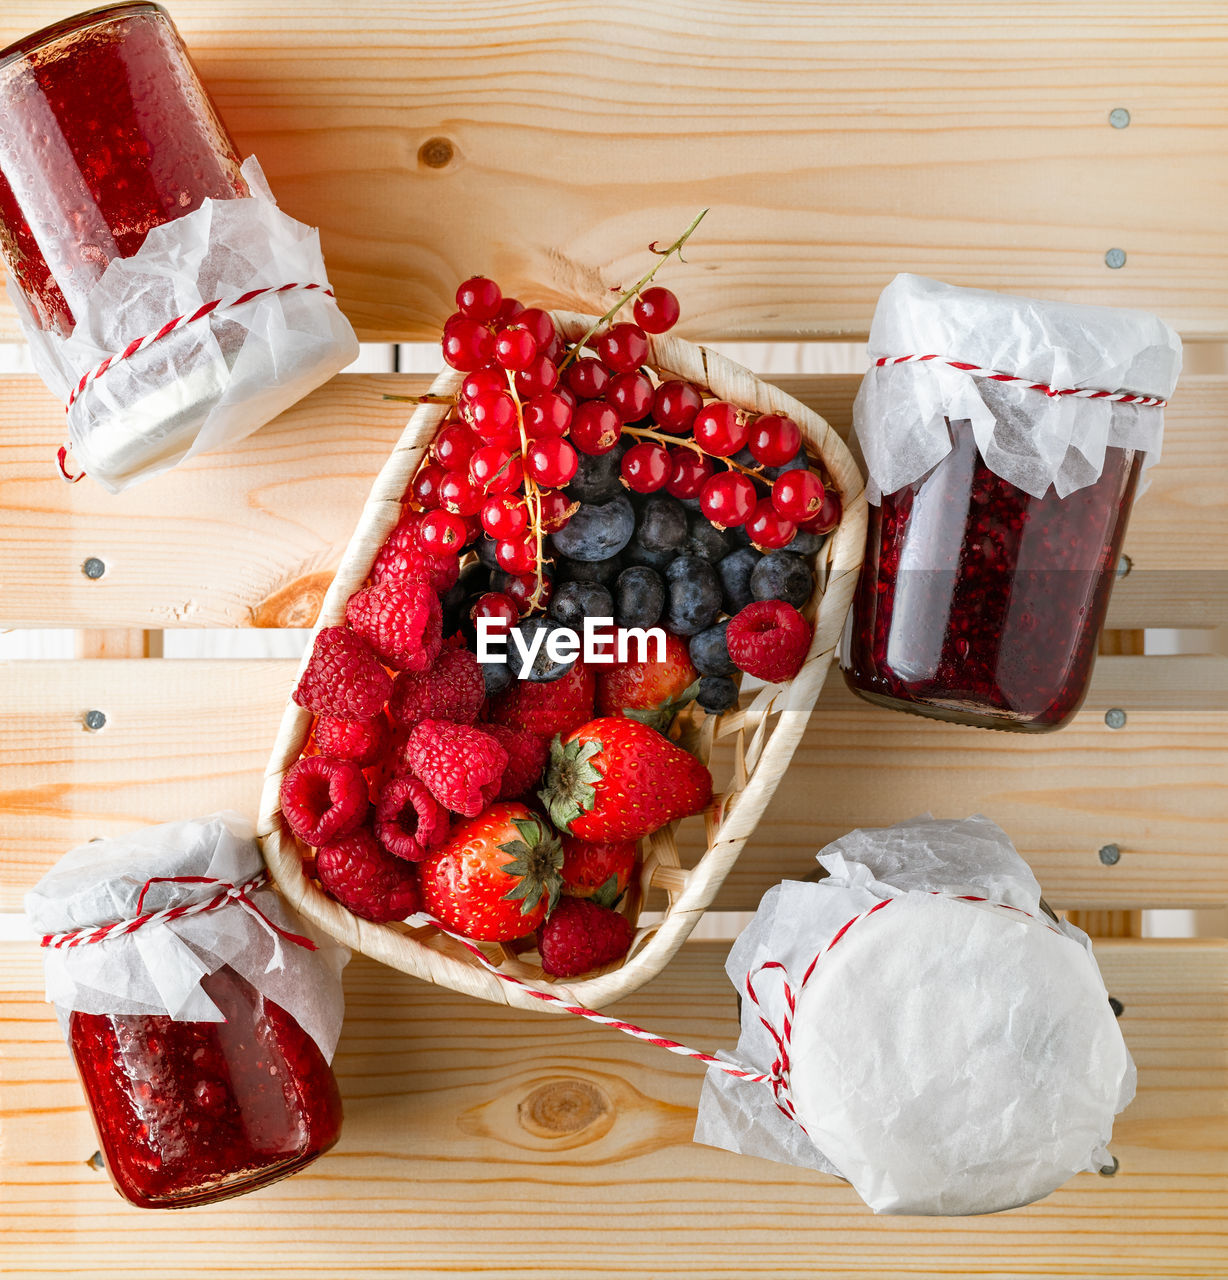 Assorted fresh berries, homemade jams in glass jars on wooden background, top view